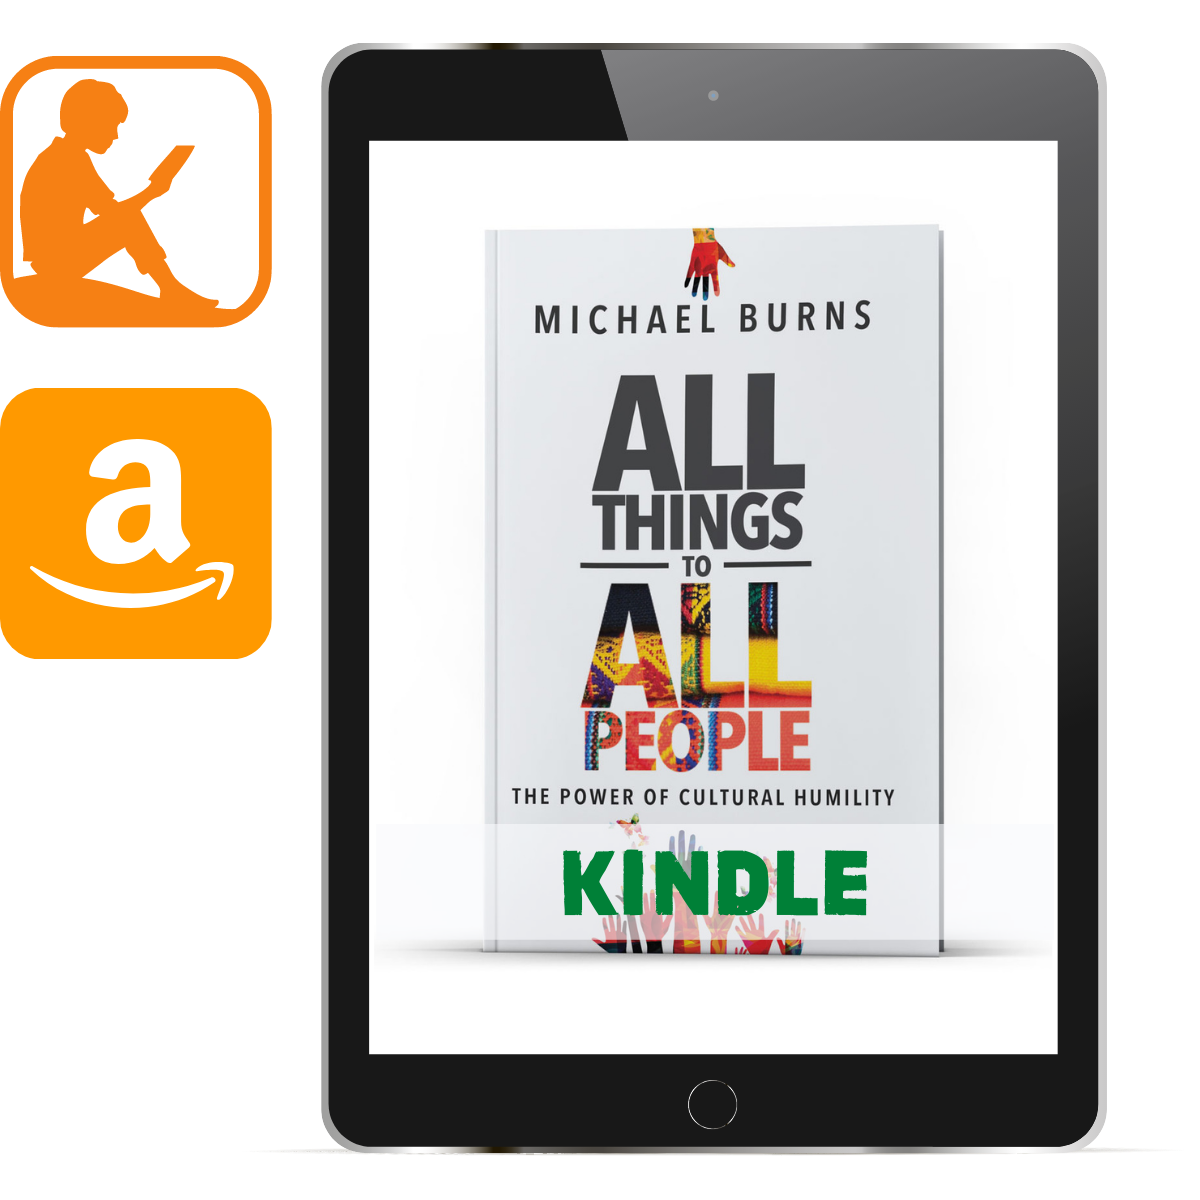 All Things to All People (Kindle) - Illumination Publishers